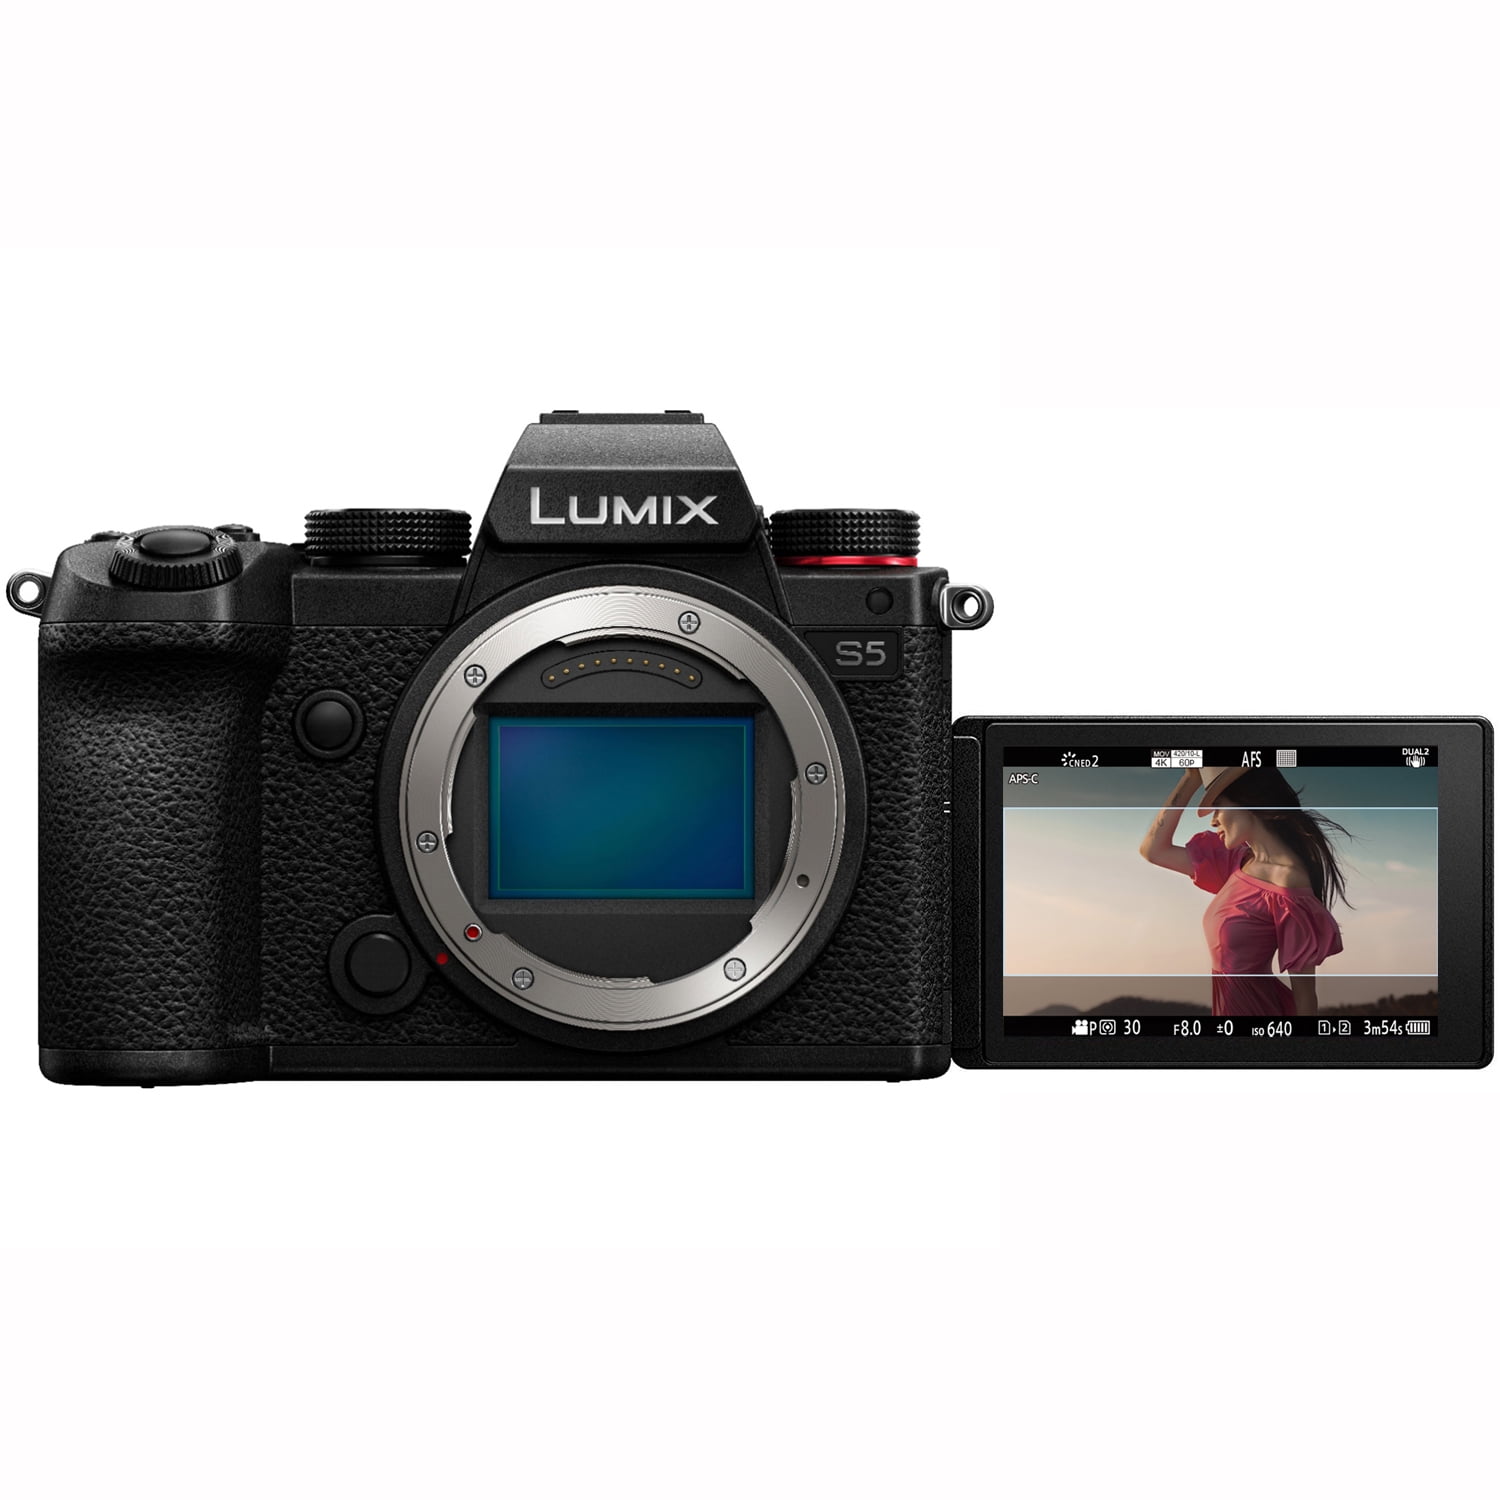 Panasonic LUMIX S5 Full Frame Mirrorless Camera, 4K 60P Video Recording  with Flip Screen & WiFi, L-Mount, 5-Axis Dual IS, DC-S5BODY (Black)